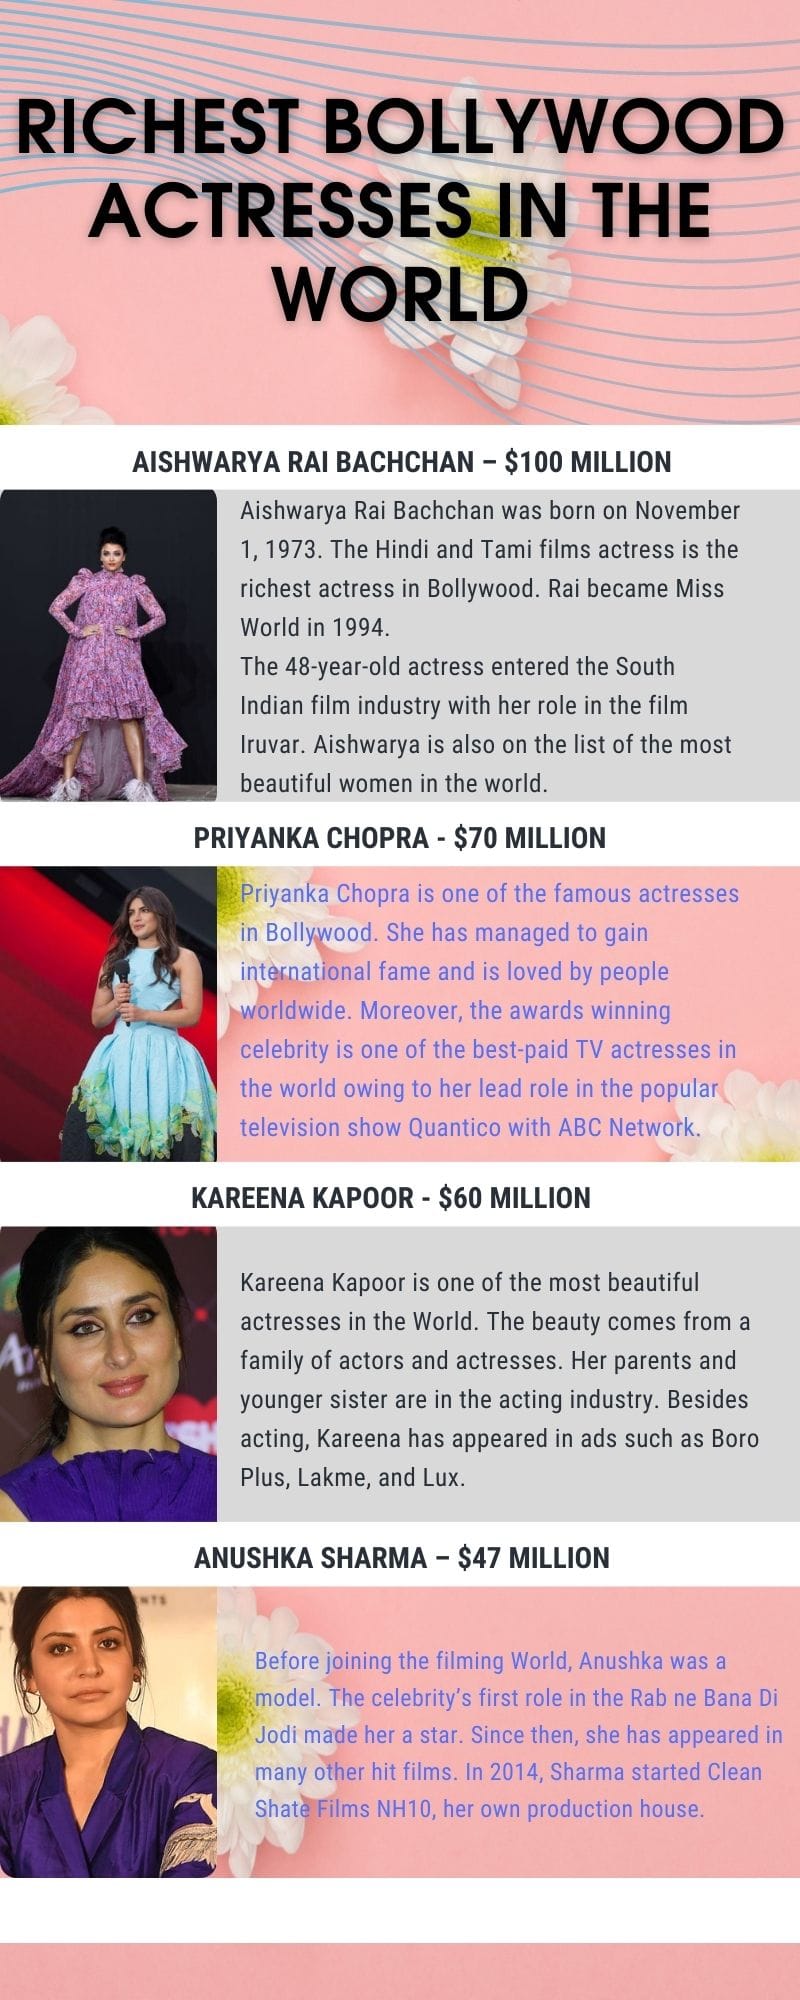 Richest Bollywood actresses